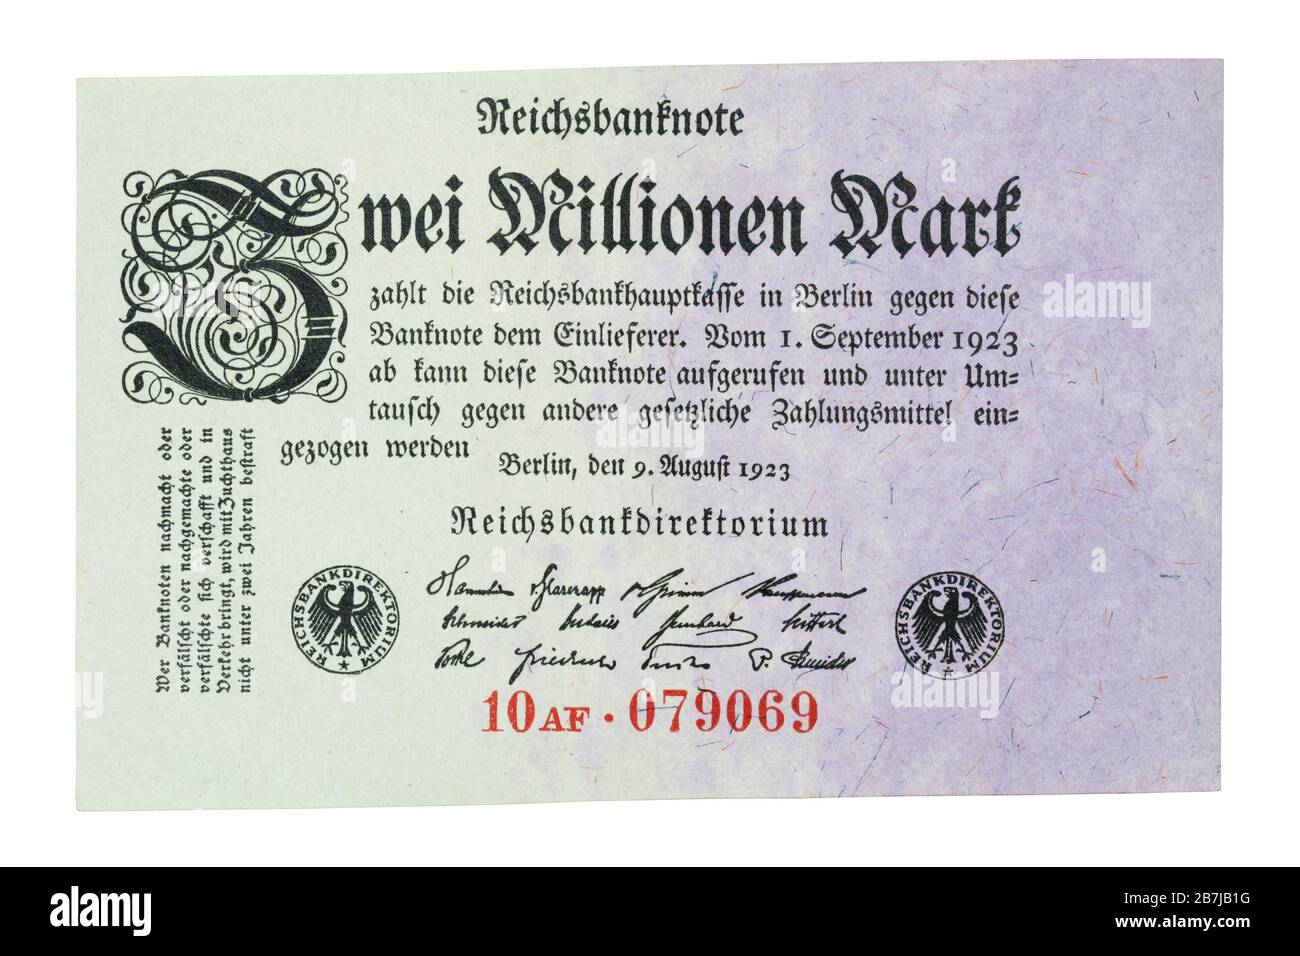 German Hyperinflation Banknote from 1923: 2 million Mark banknote from German hyperinflation in 1923 Stock Photo